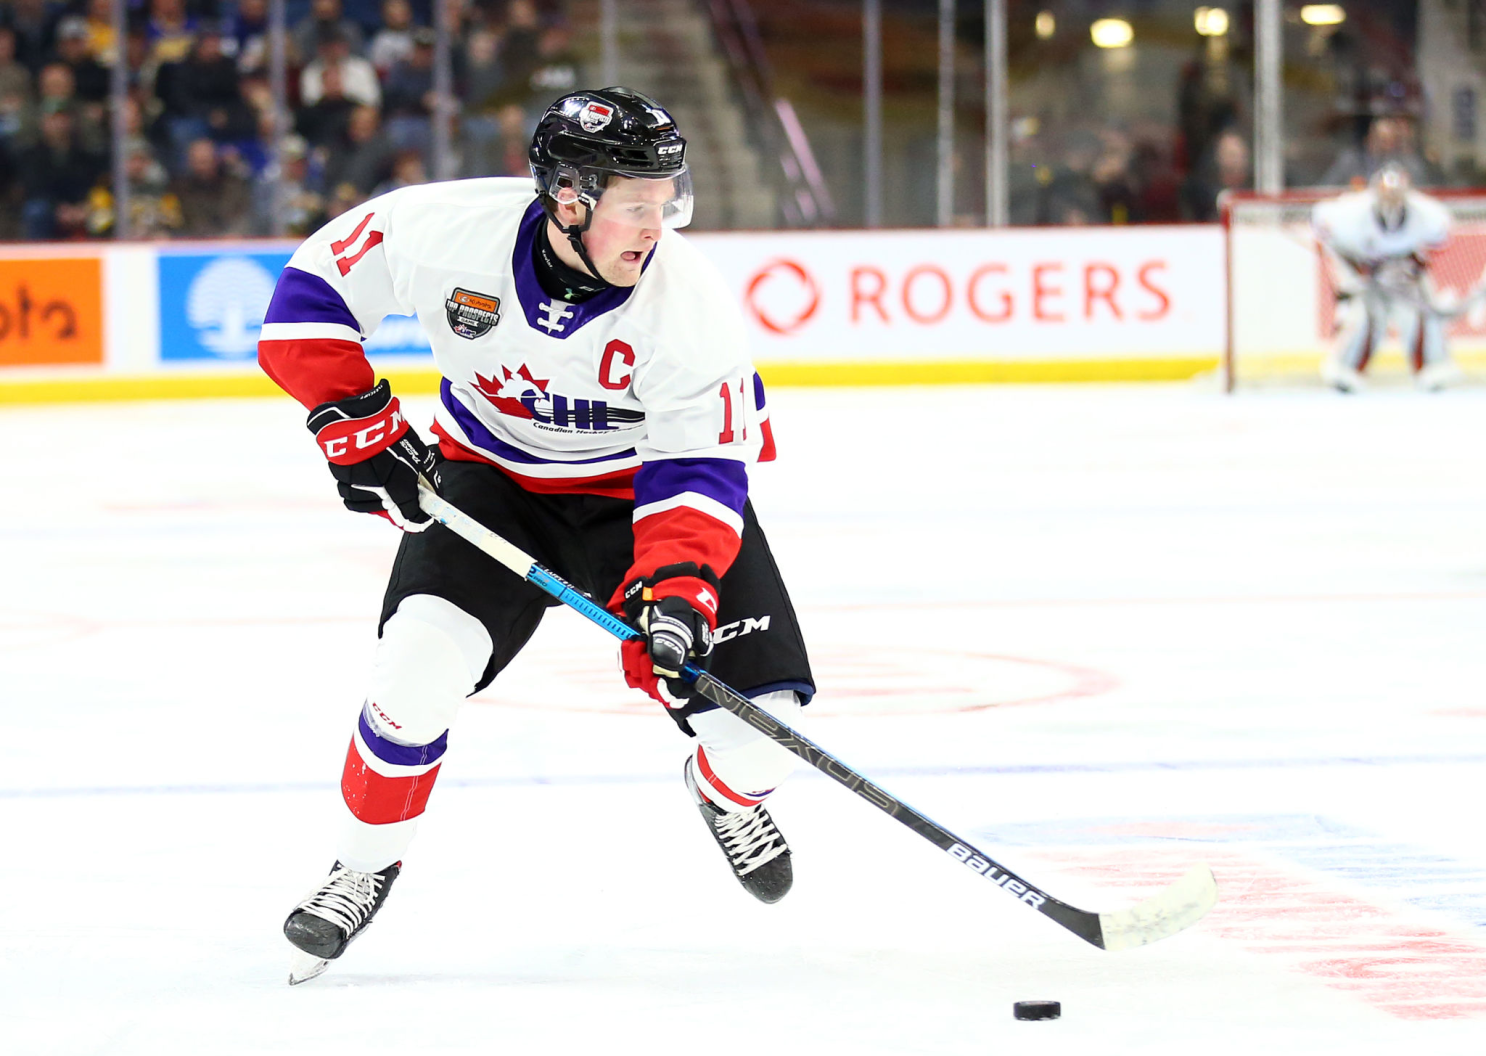 N.H.L. Draft: Rangers Select Alexis Lafreniere With First Overall Pick